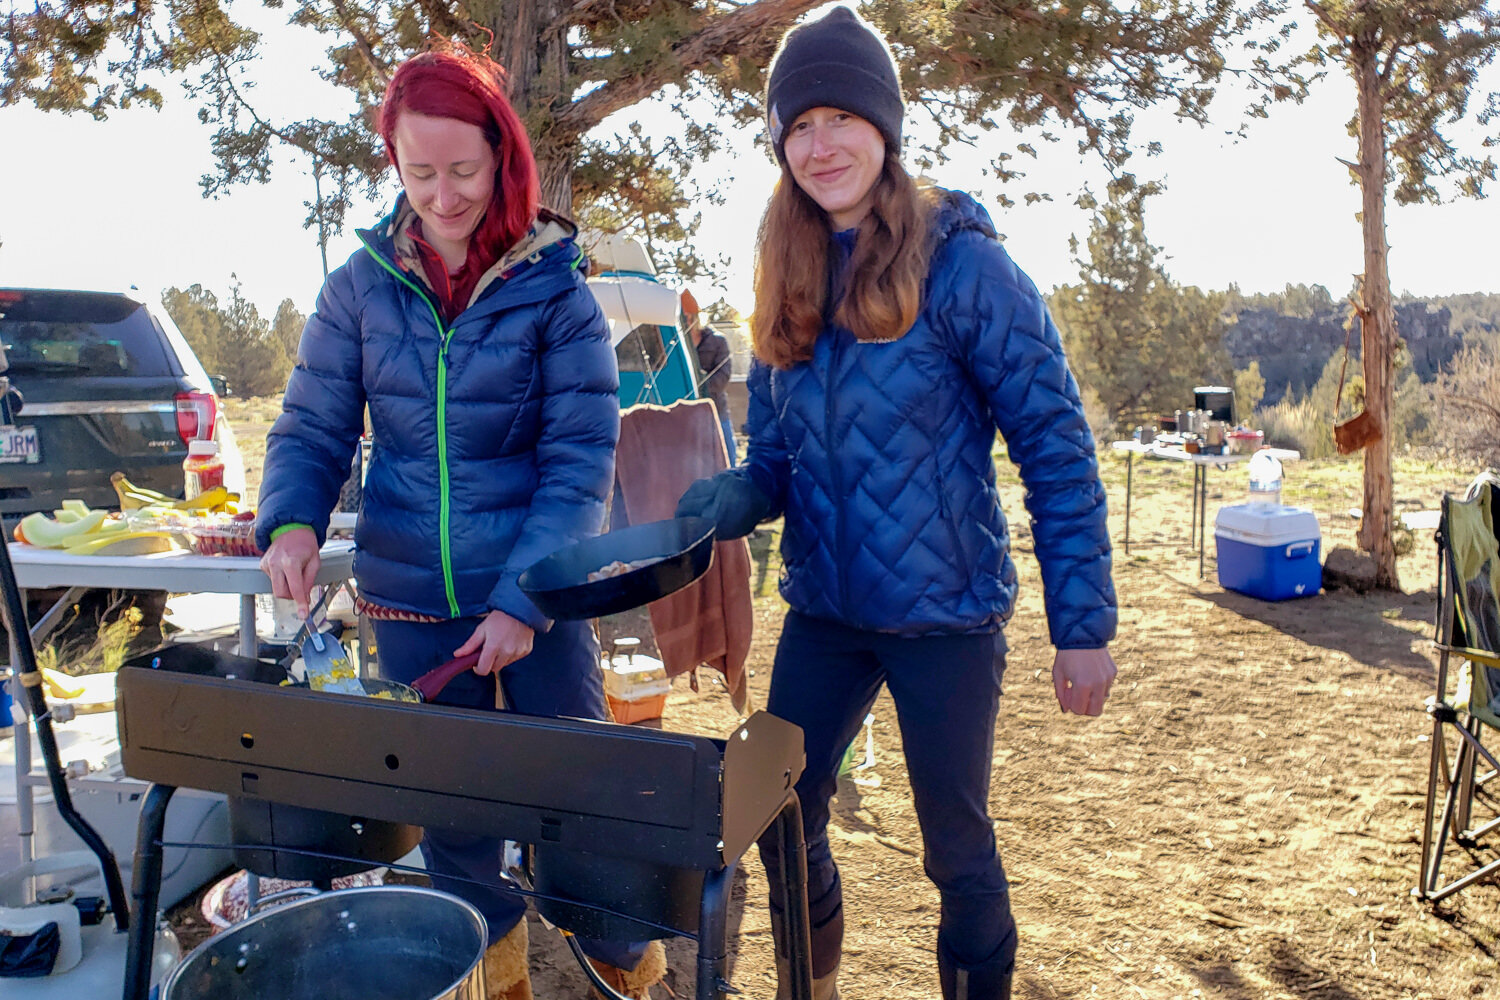 If you aren’t tight on space, a stove like the Camp Chef Explorer Two-Burner is worth it’s weight for multi-day camping for a group